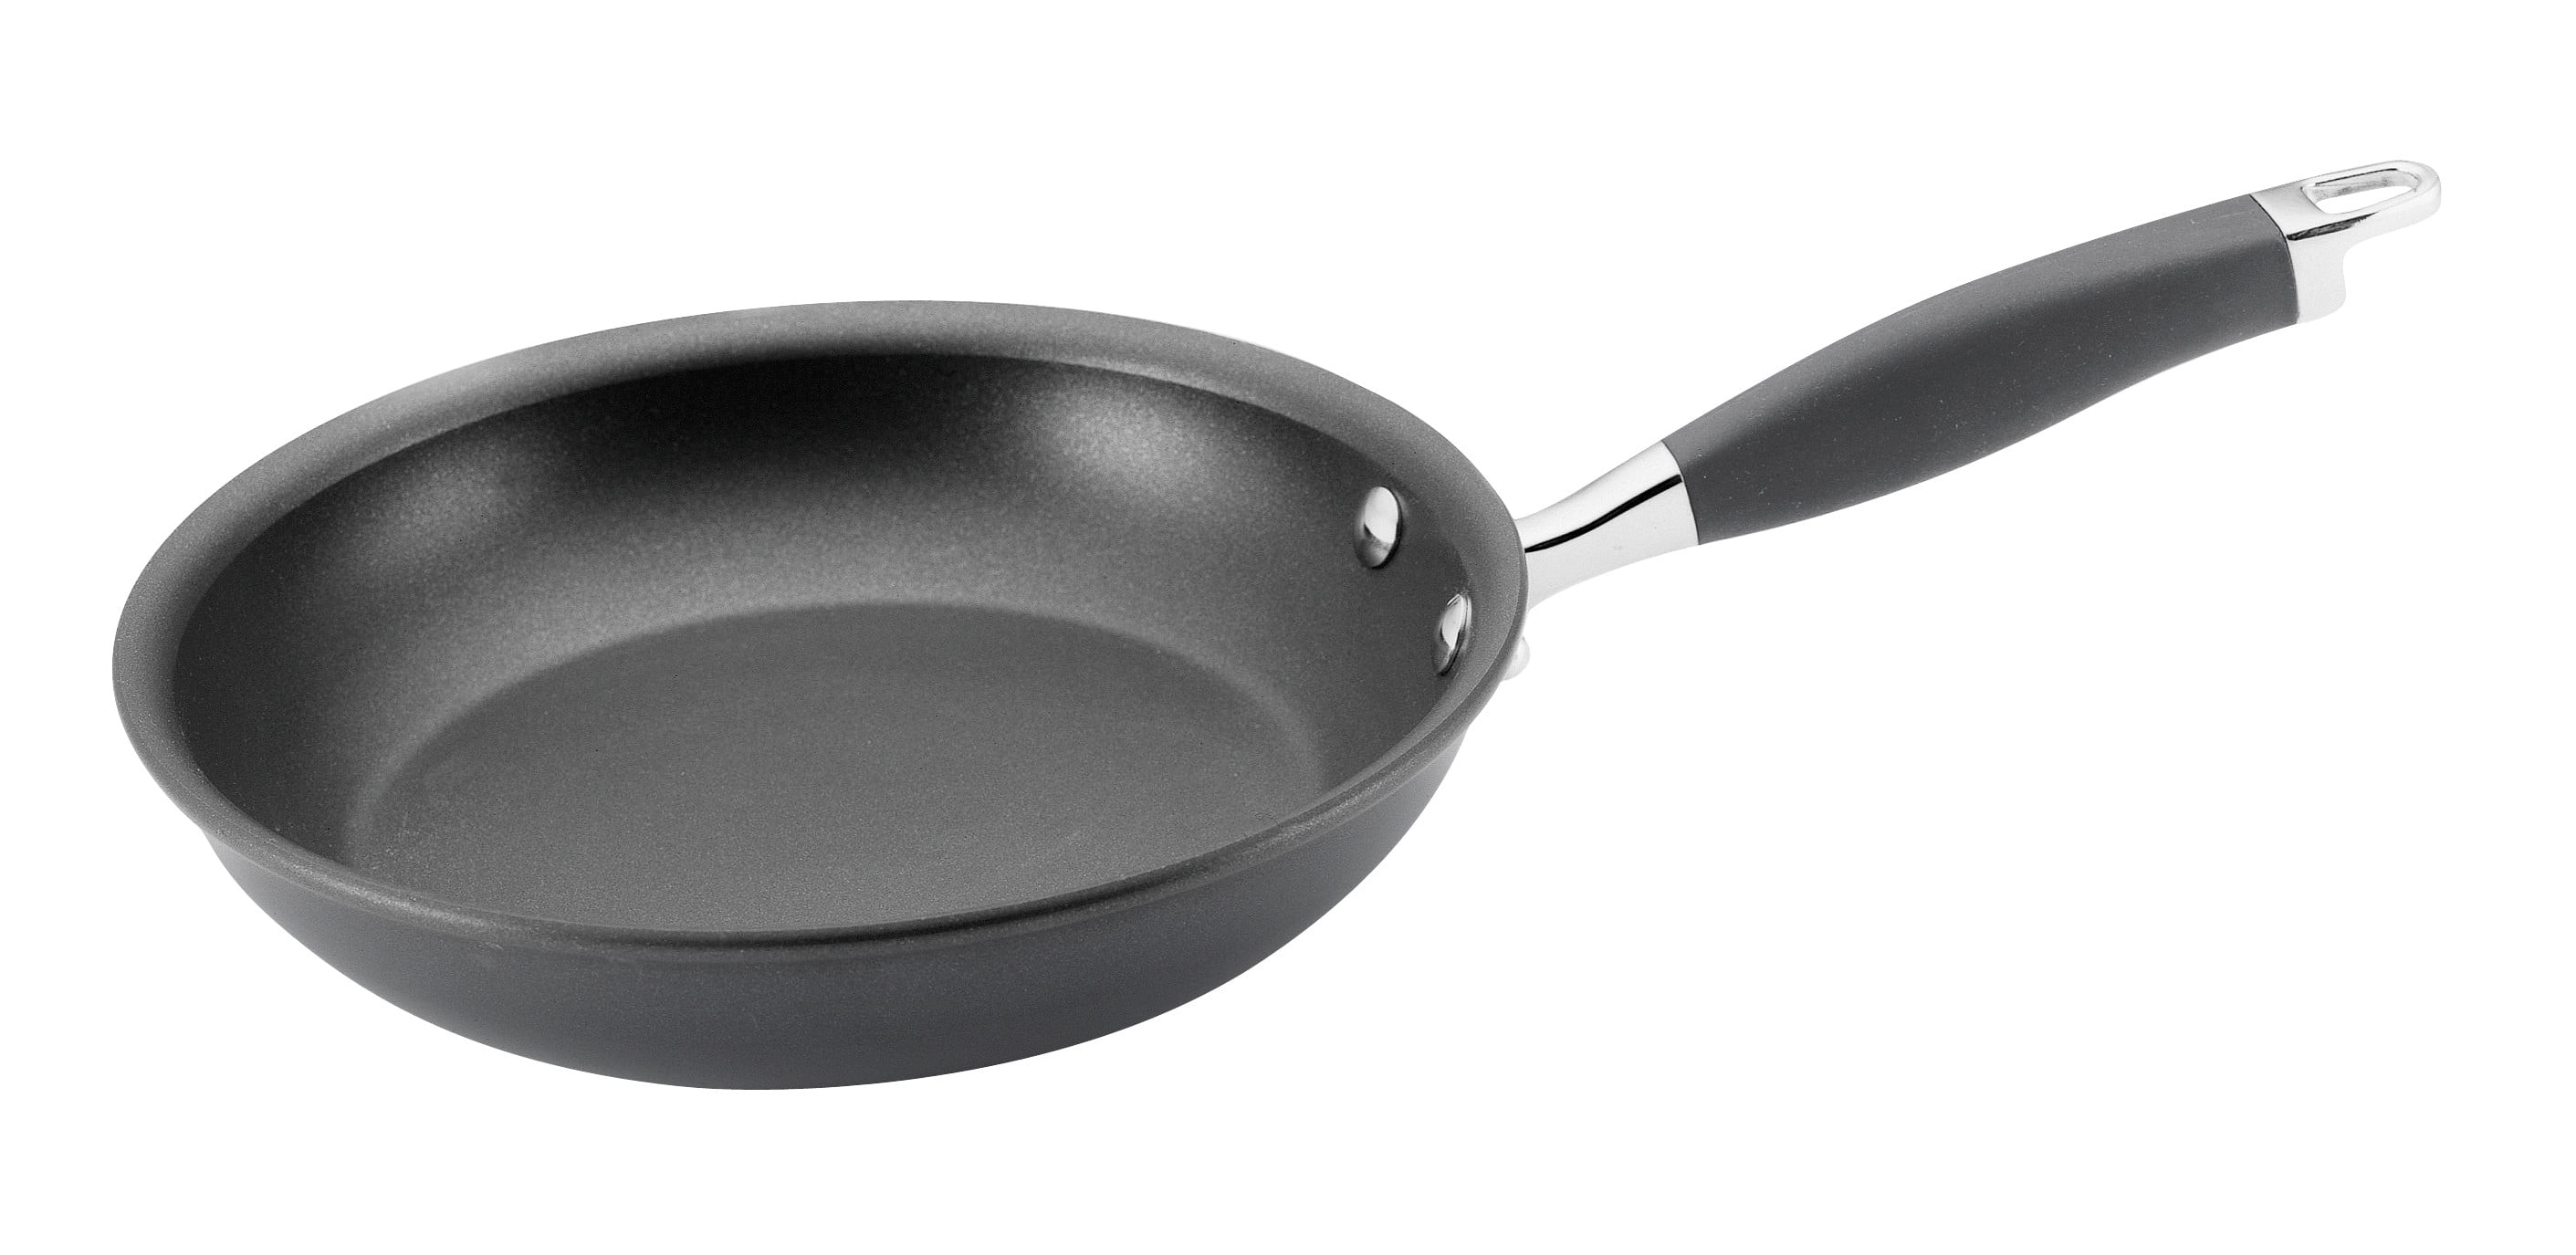 Anolon Advanced Hard Anodized Nonstick Frying Pan, 10-Inch, Gray 